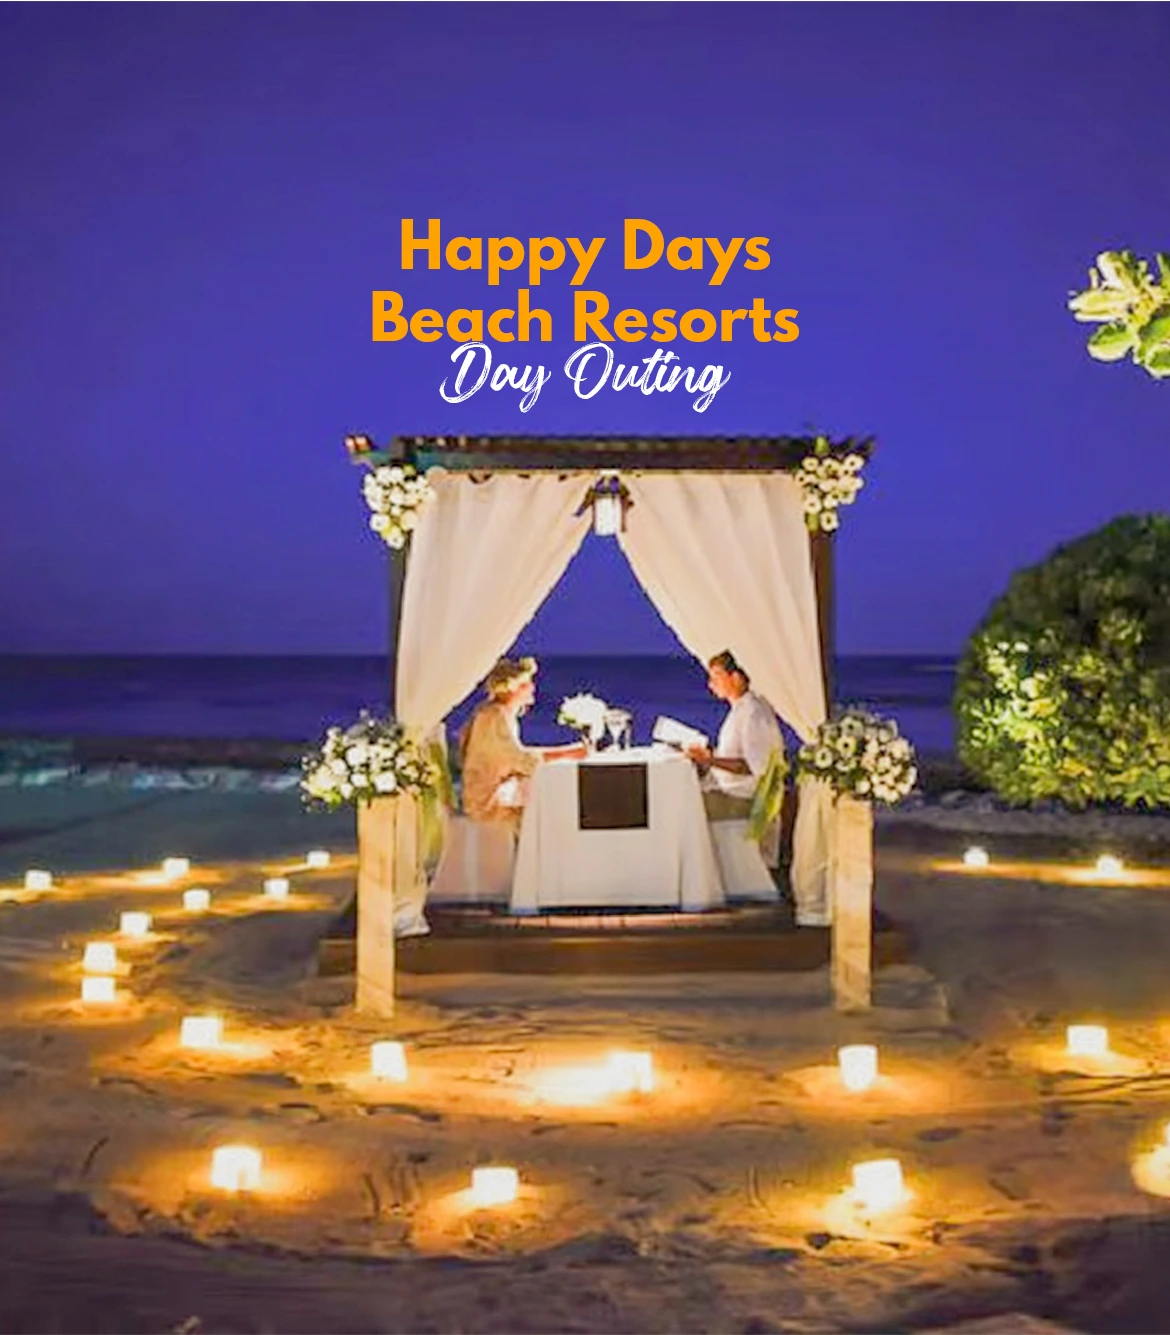 Happy Days Beach Resorts Day Outing